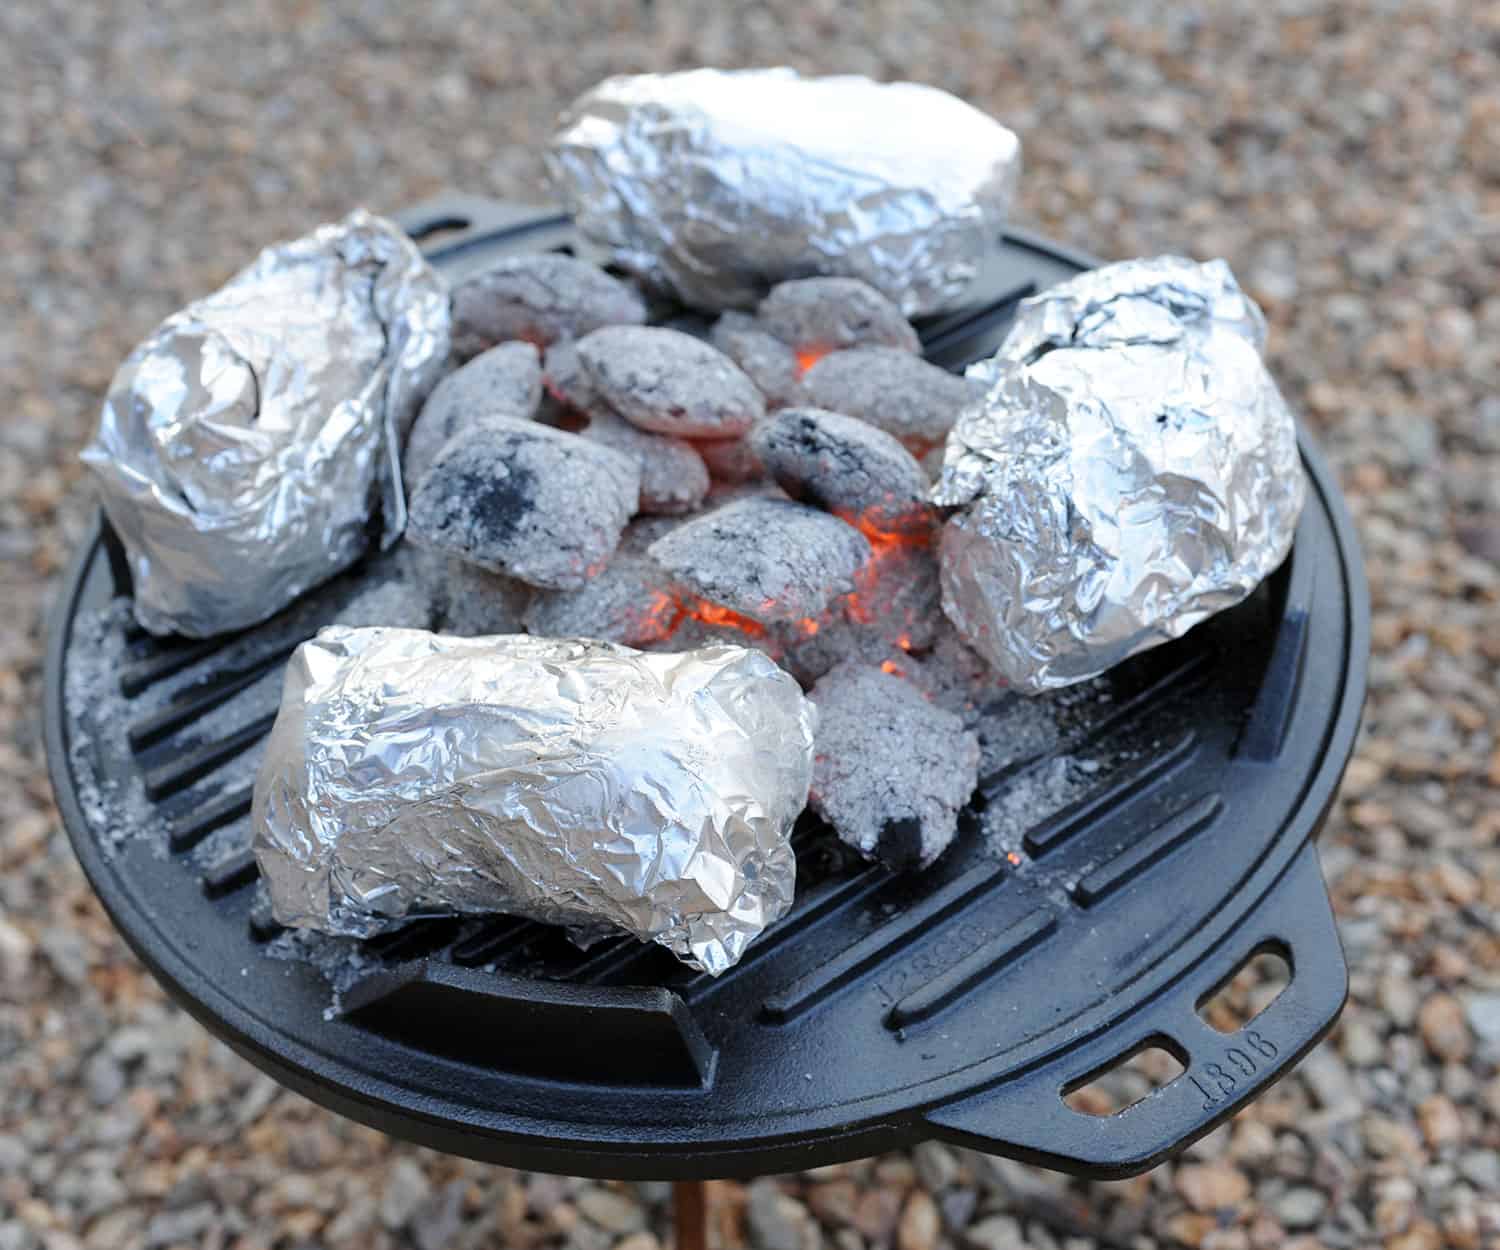 four foil-wrapped sweet potatoes on a grill.